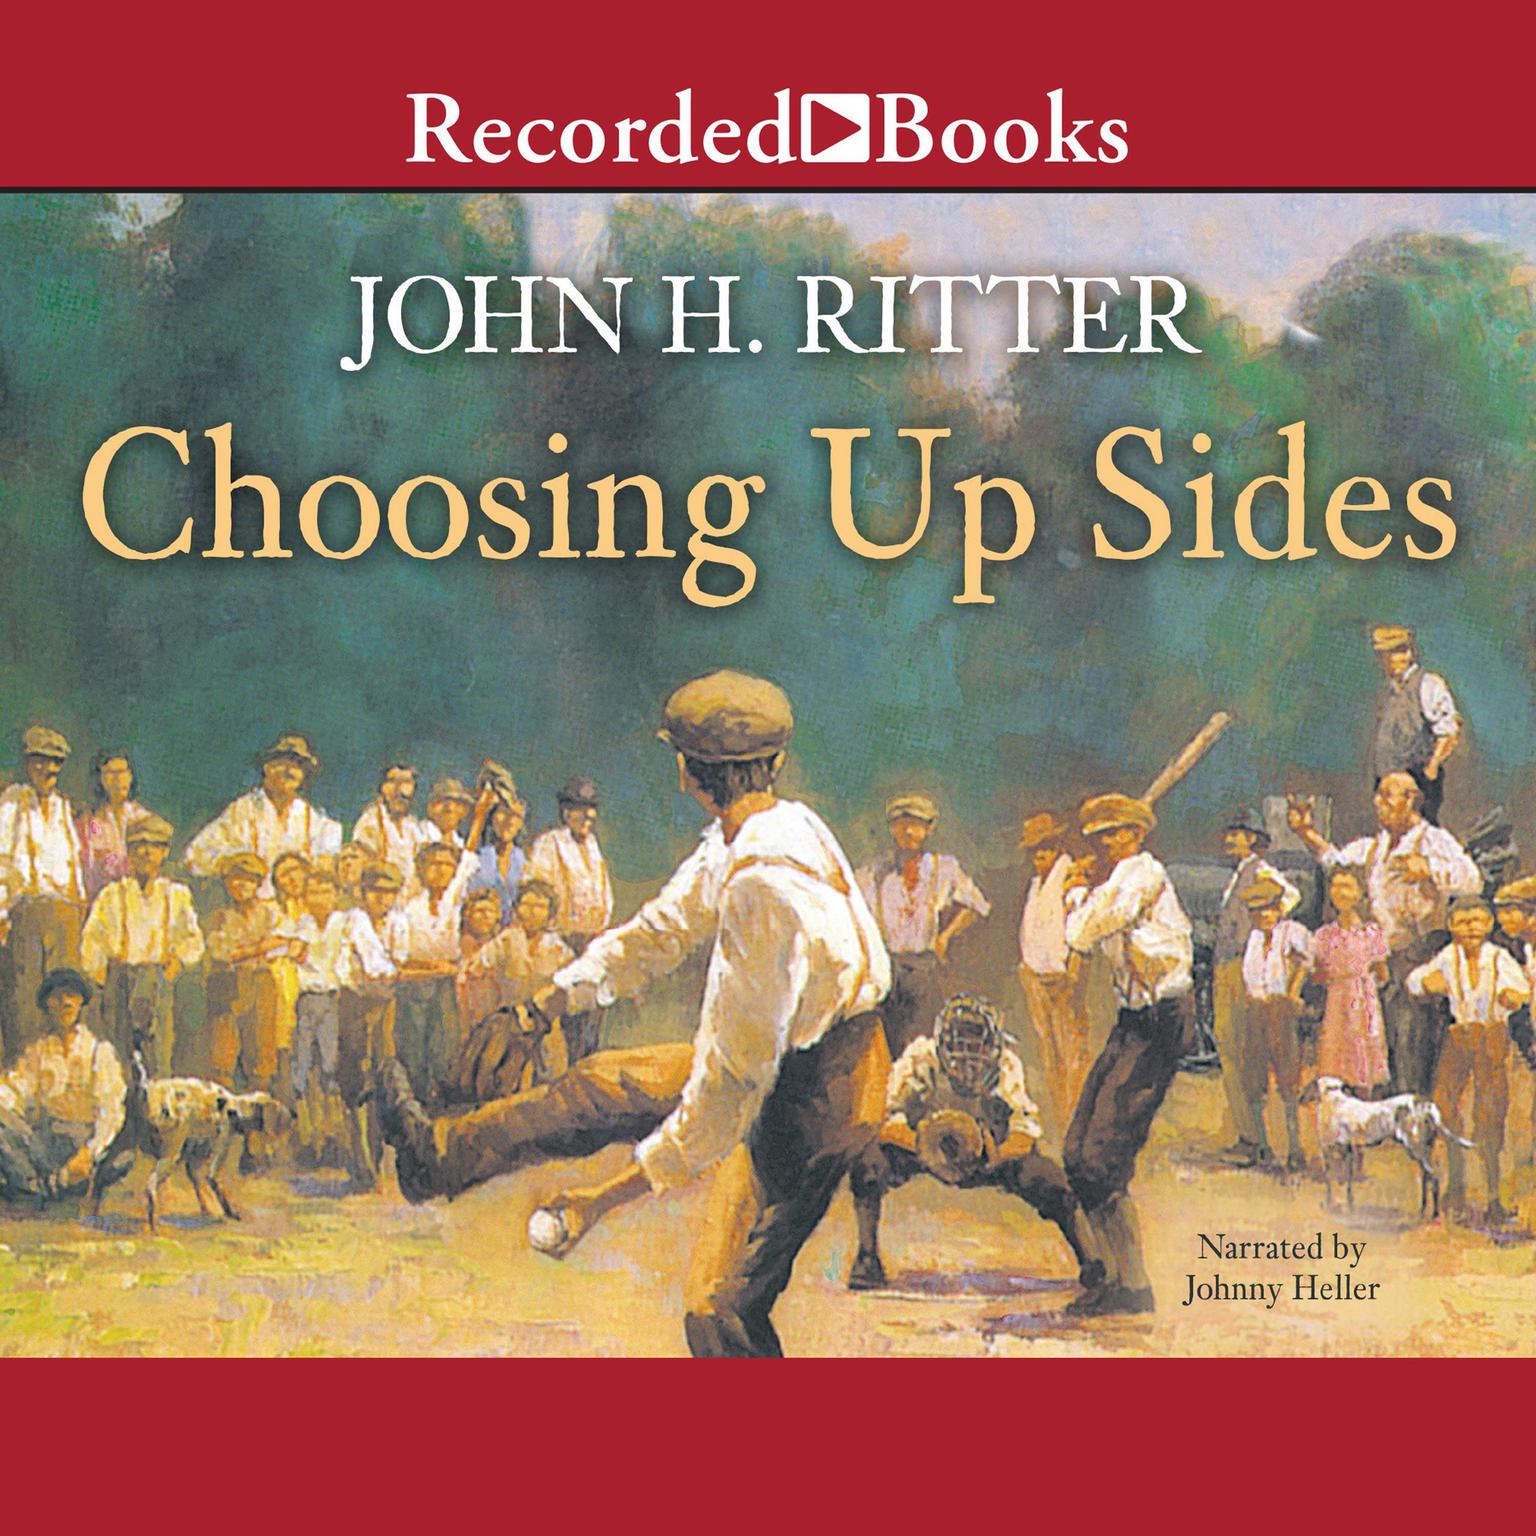 Choosing Up Sides Audiobook, by John H. Ritter